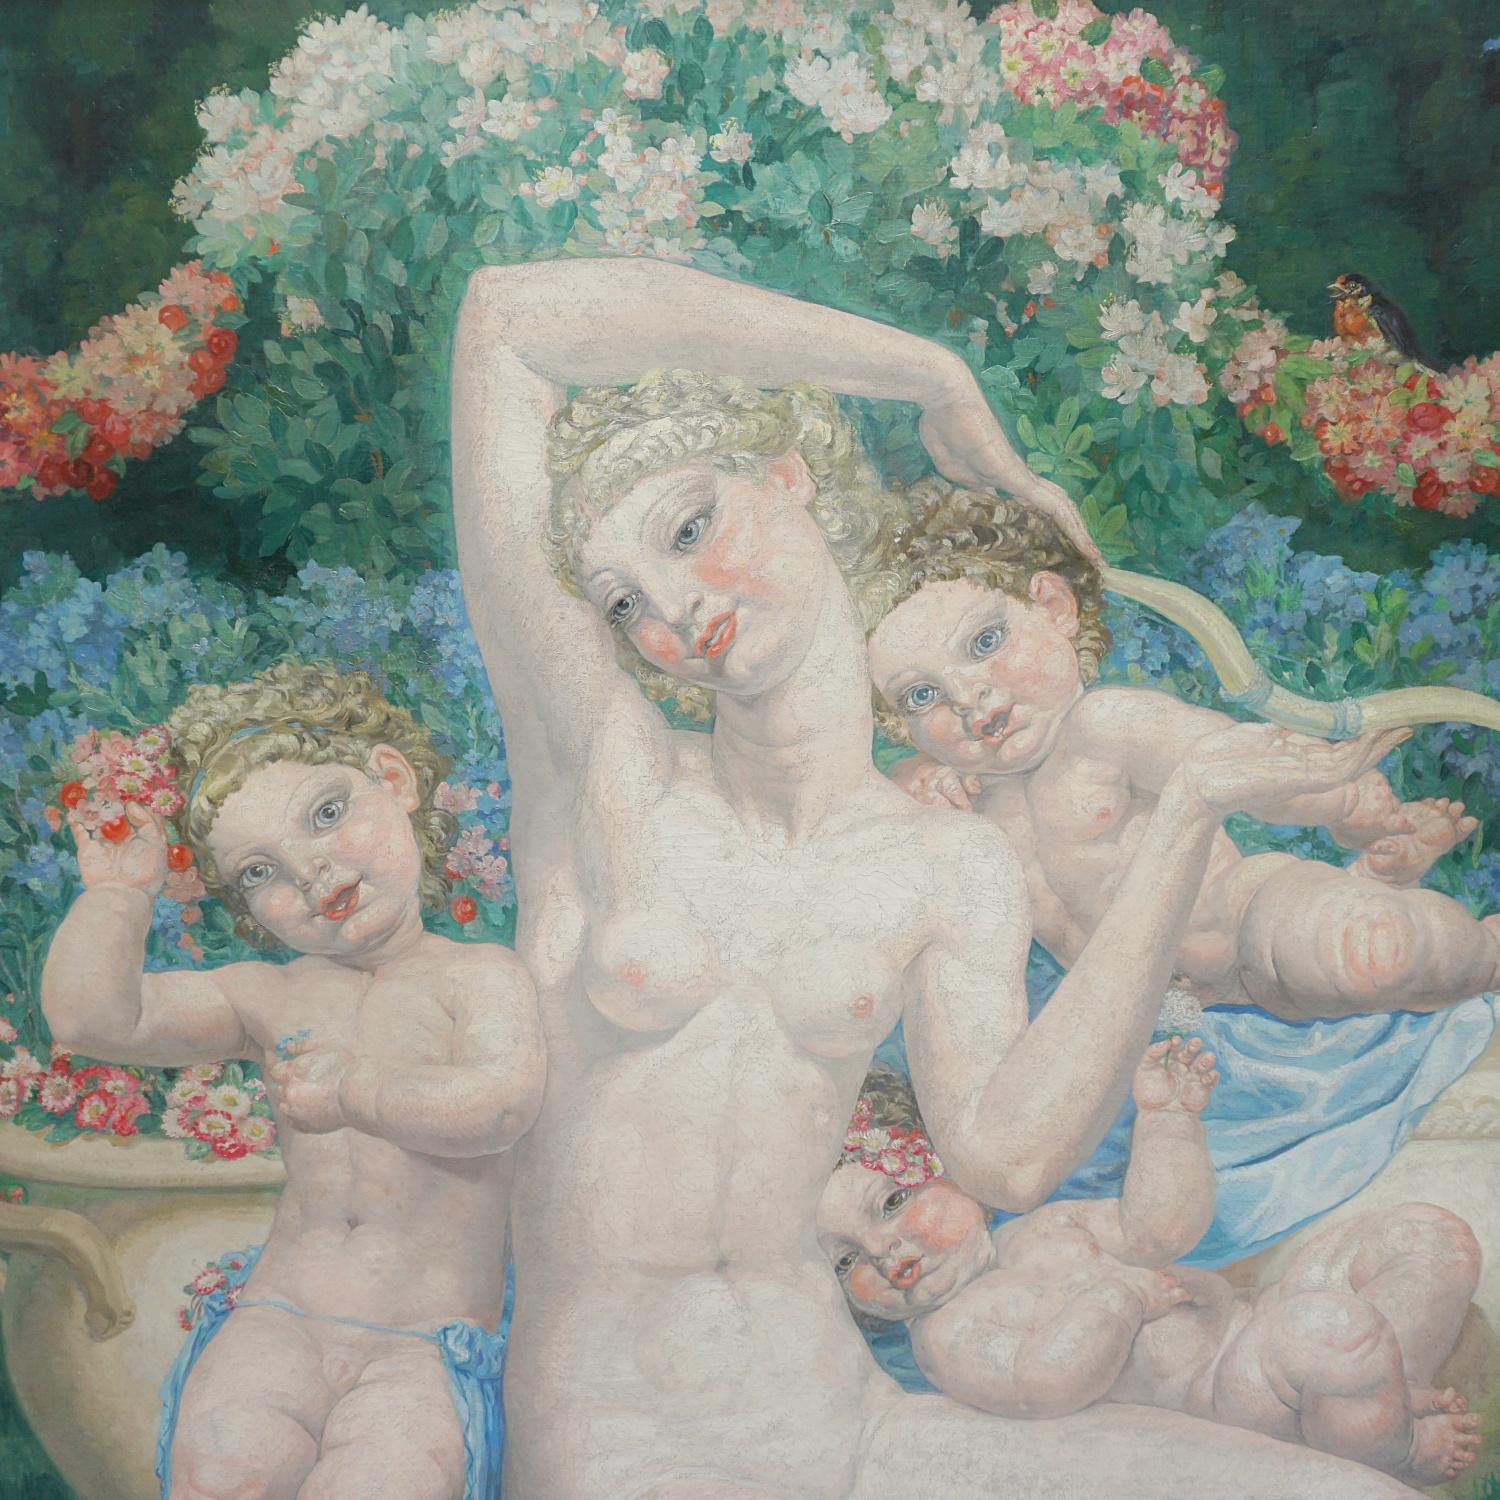 'Symphonie d'Azur' A large Art Deco painting by Valentine Lecomte. Depicting an allegory of love and lost innocence. Possibly Venus with Cupid and Cherubim surrounding her. Taking influences from Venetian mannerist art. Signed V Lacomte and dated